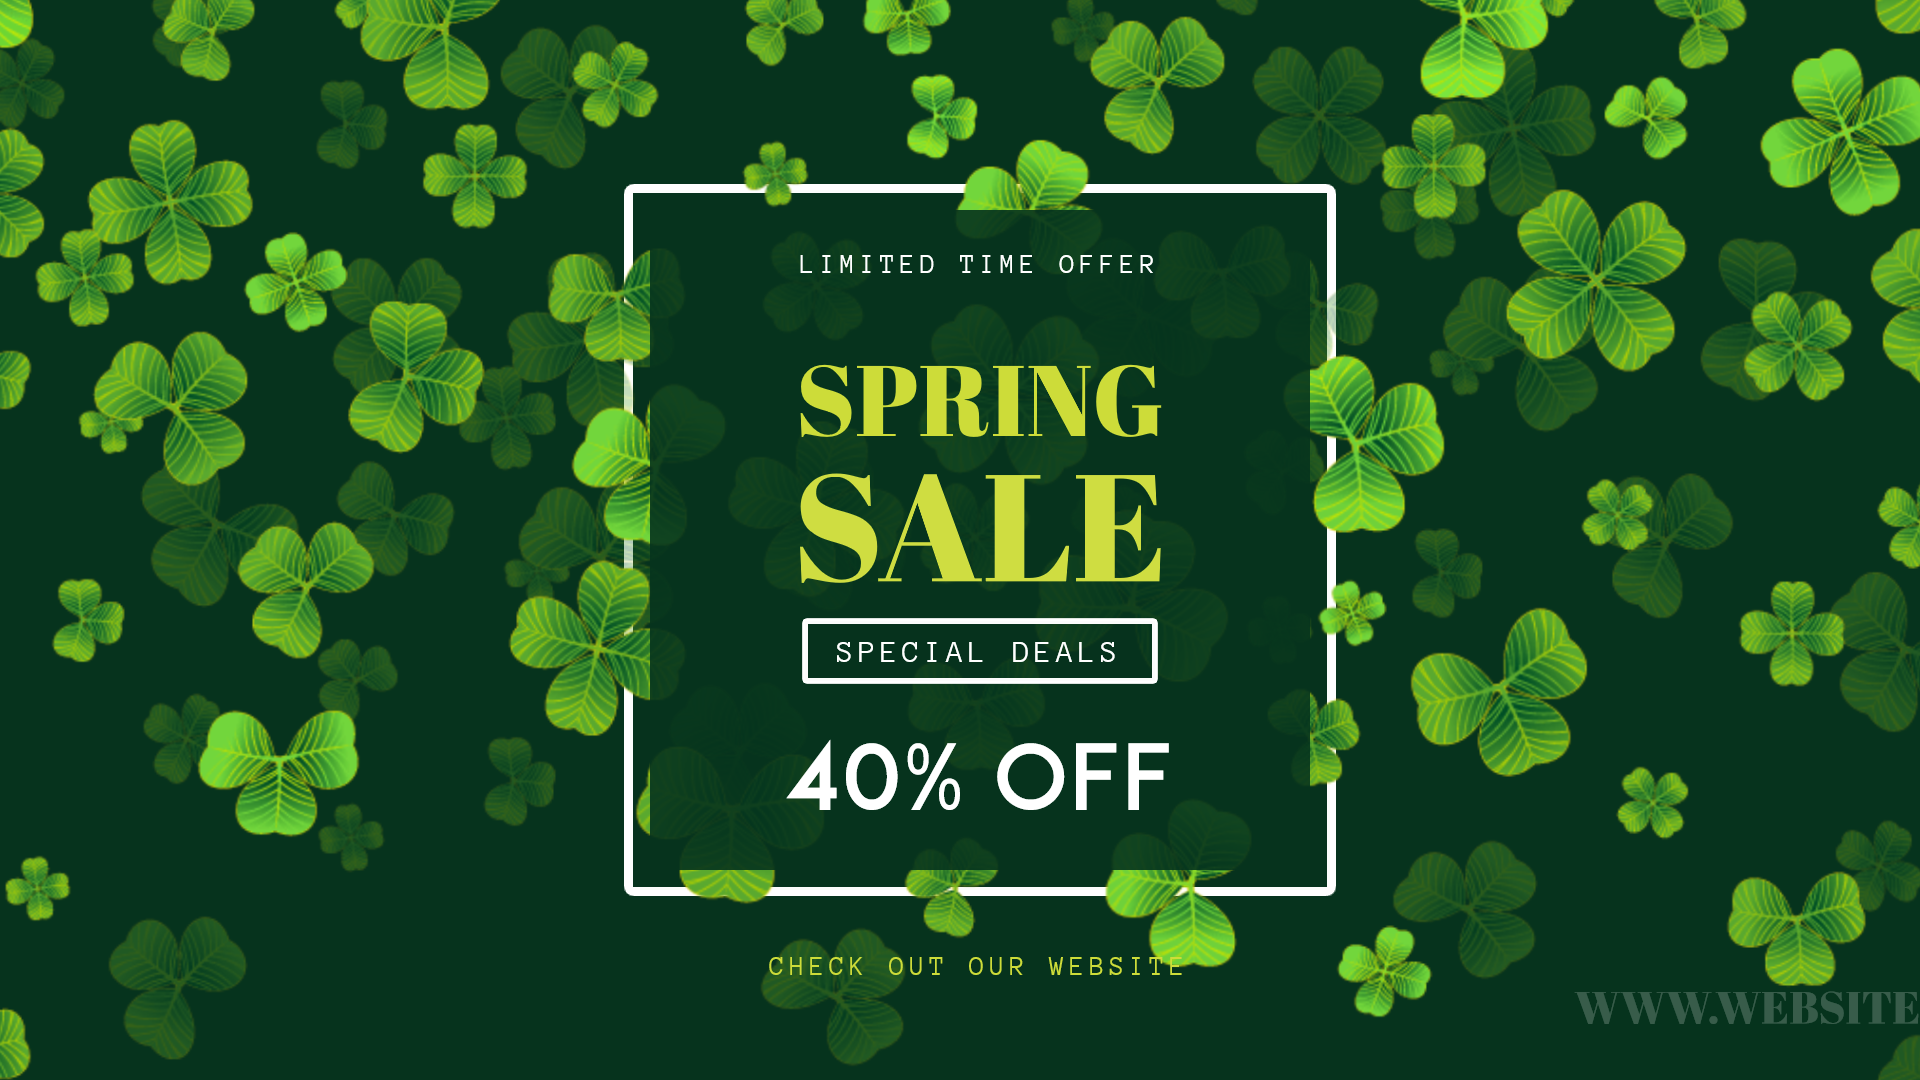 Spring Sale - Limited time offer Animation Template - #1577194